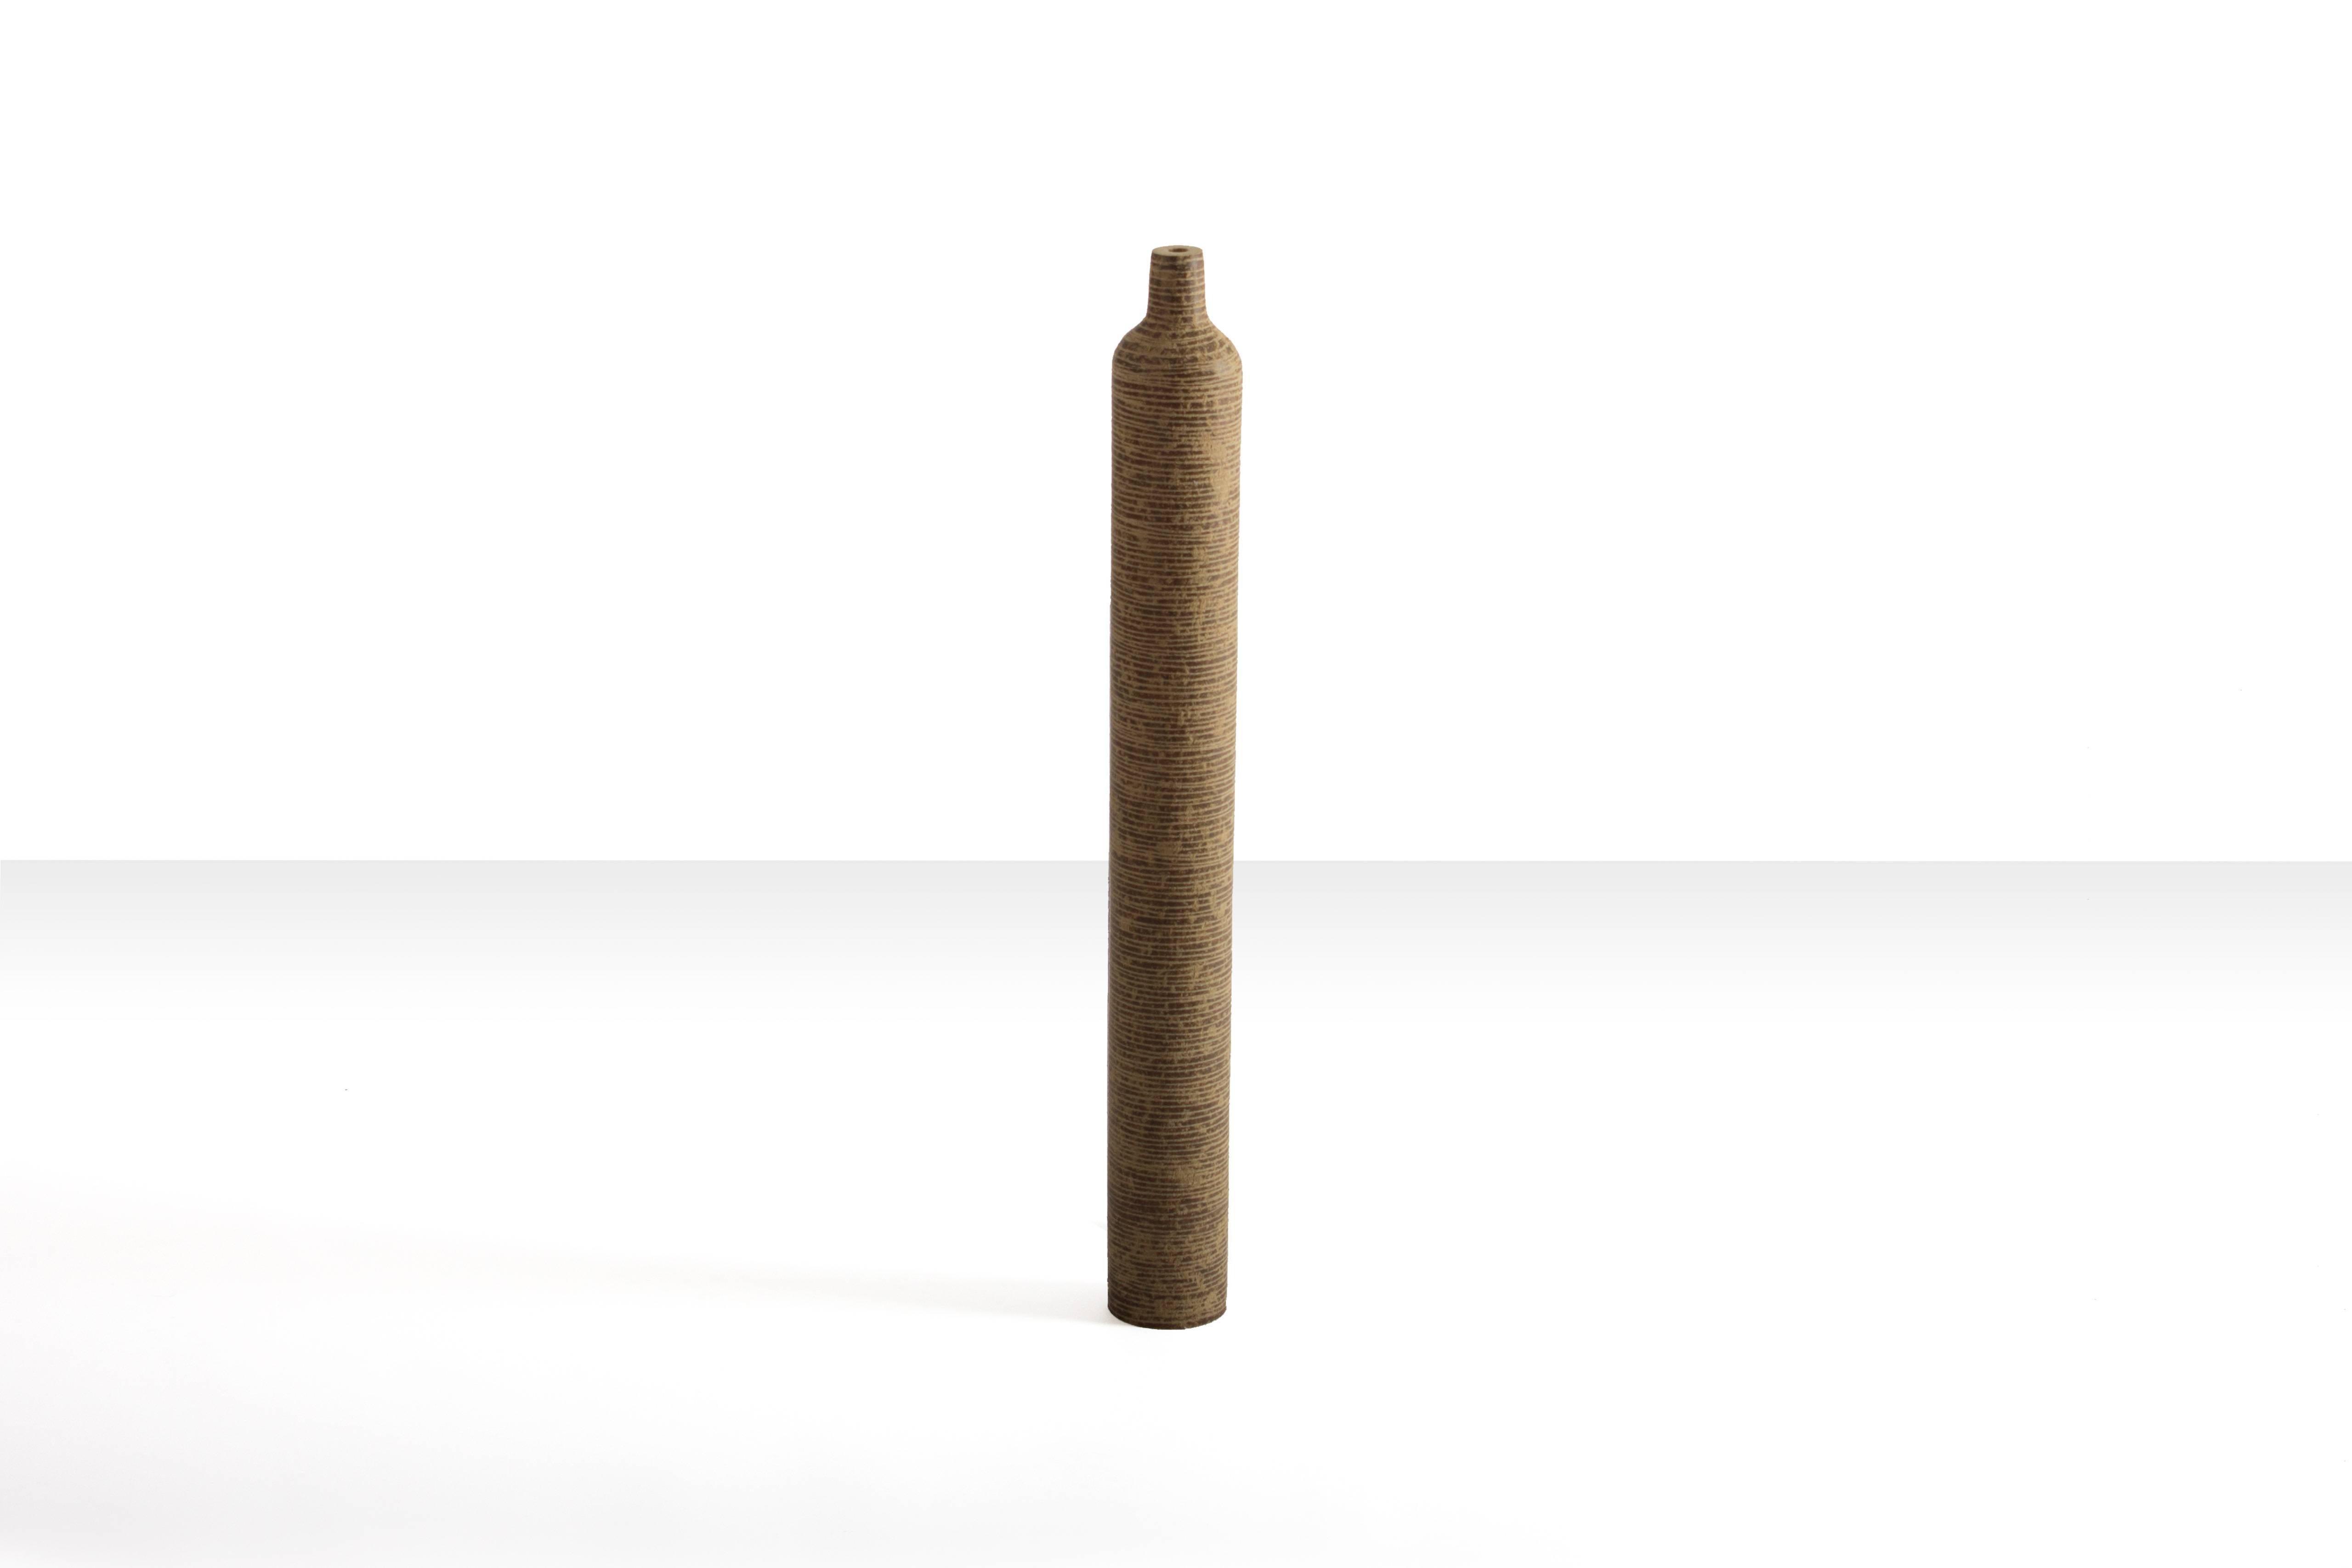 Large ribbed Anfora vase by contemporary artist Domingos Tótora, made of recycled cardboard. Not suitable for water.

About the artist:
Domingos Tótora (born and raised in Maria da Fé, Brazil, 1960) creates objects and sculptures where beauty is